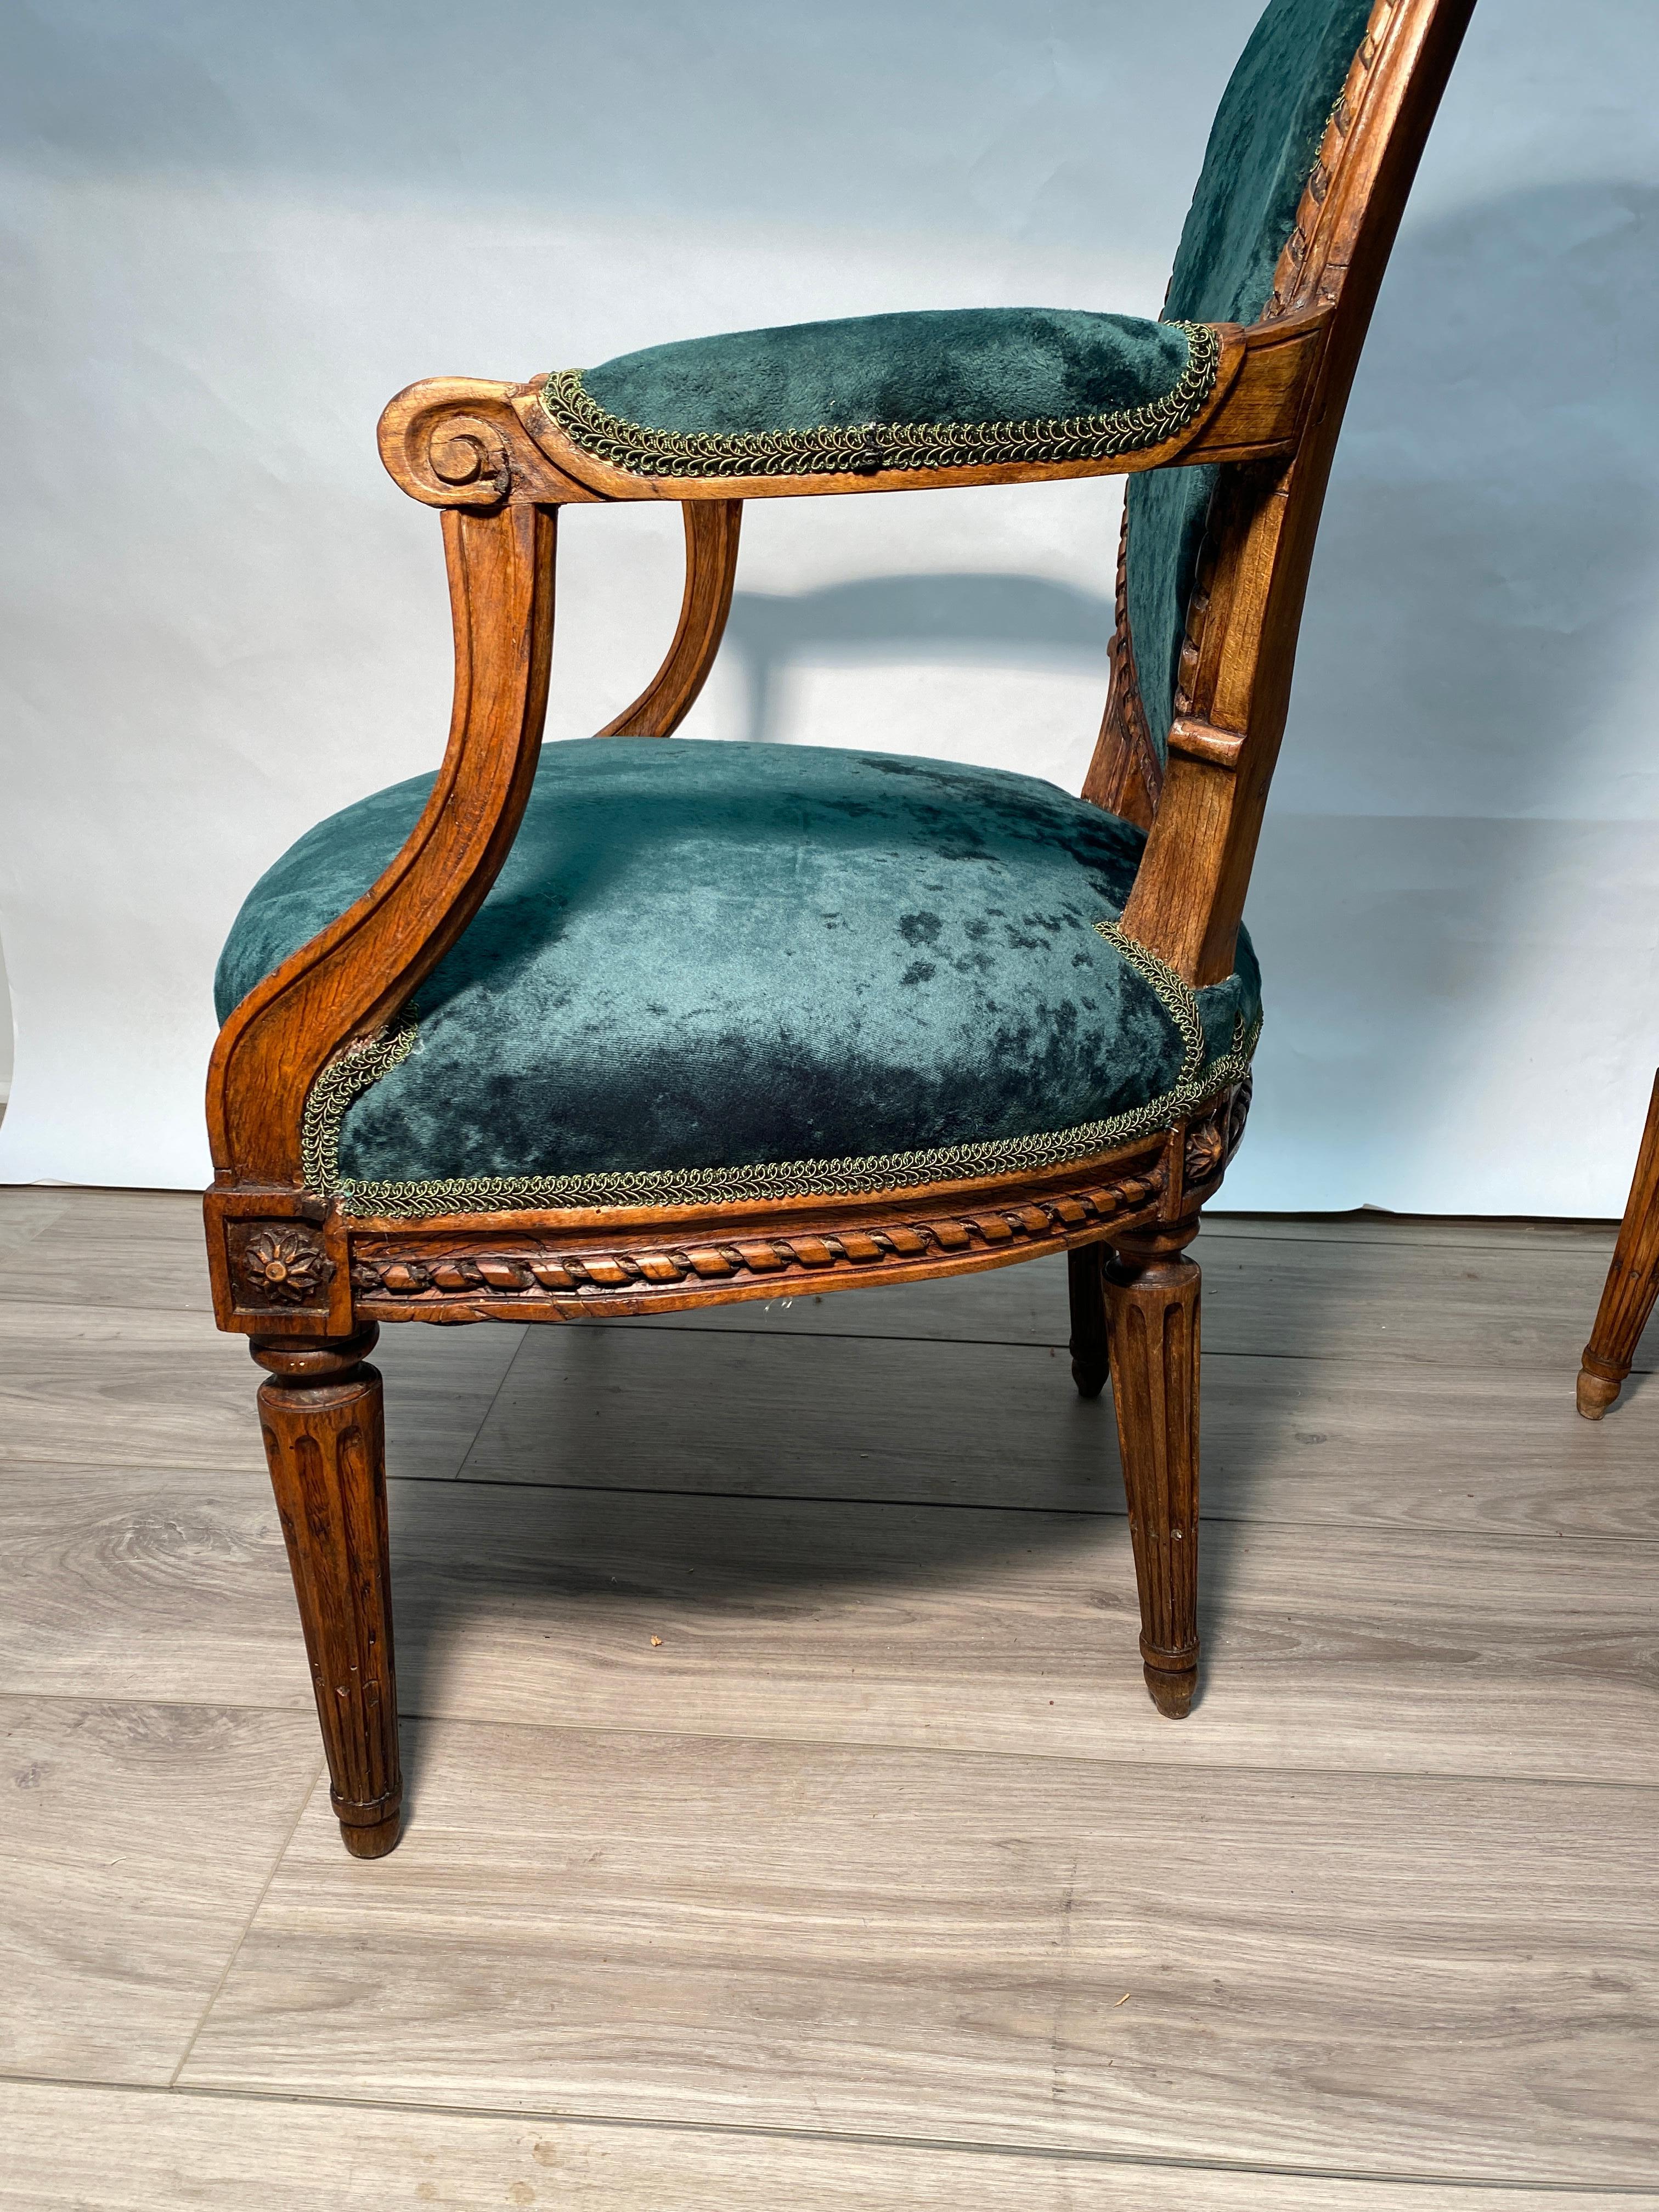 Pair of Period 18th Century French Louis XVI Walnut Fauteuil Arm Chairs For Sale 3